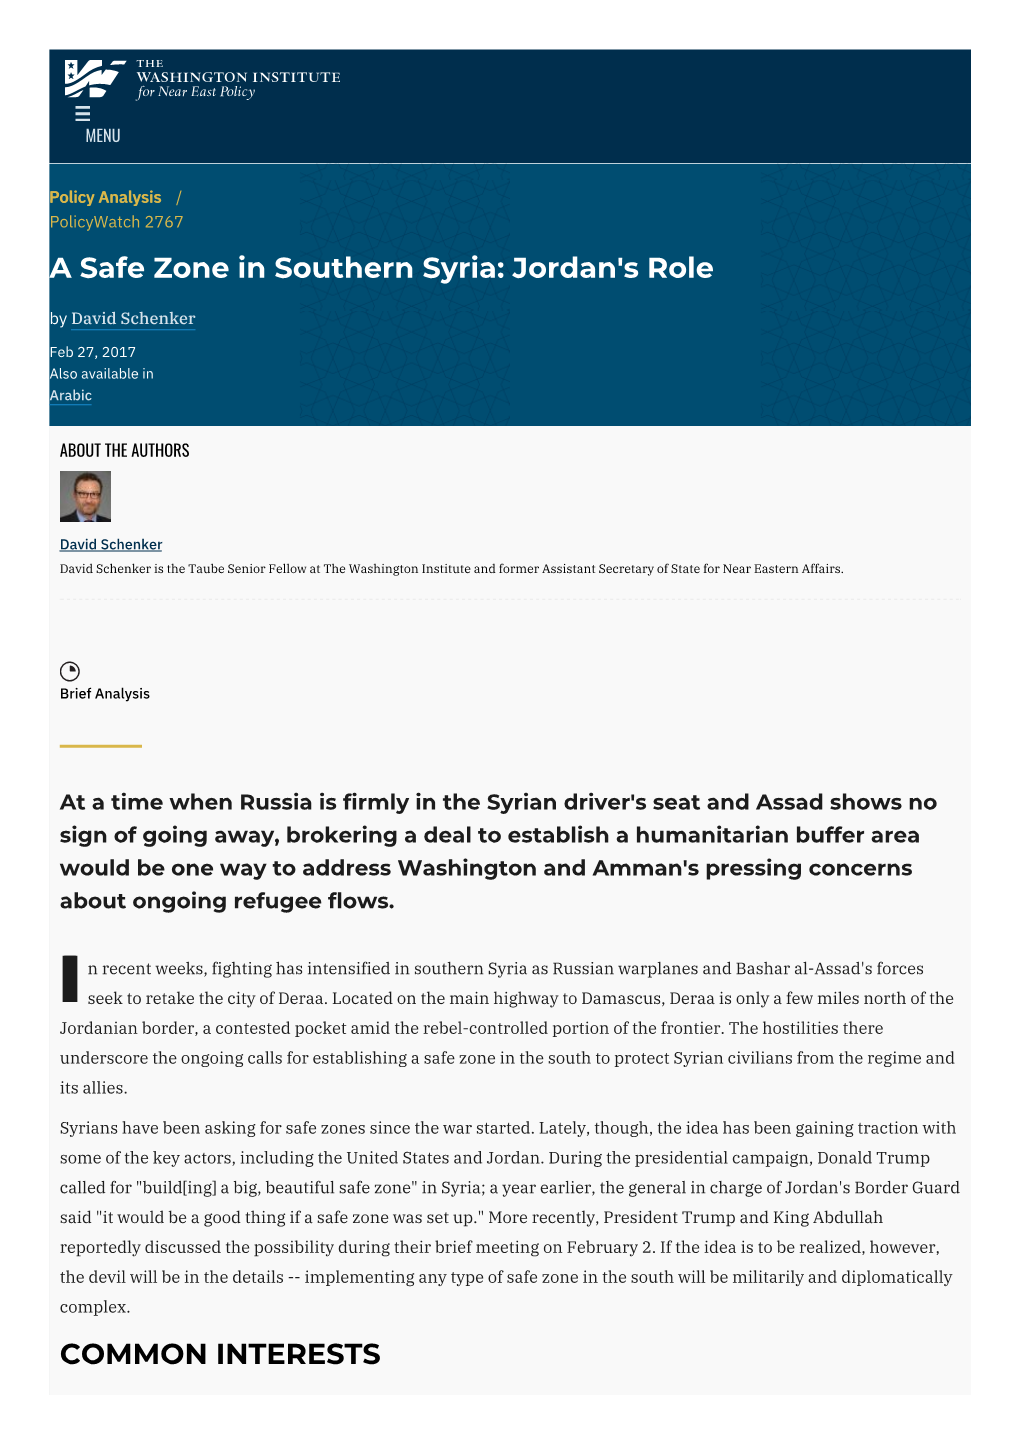 A Safe Zone in Southern Syria: Jordan's Role | the Washington Institute